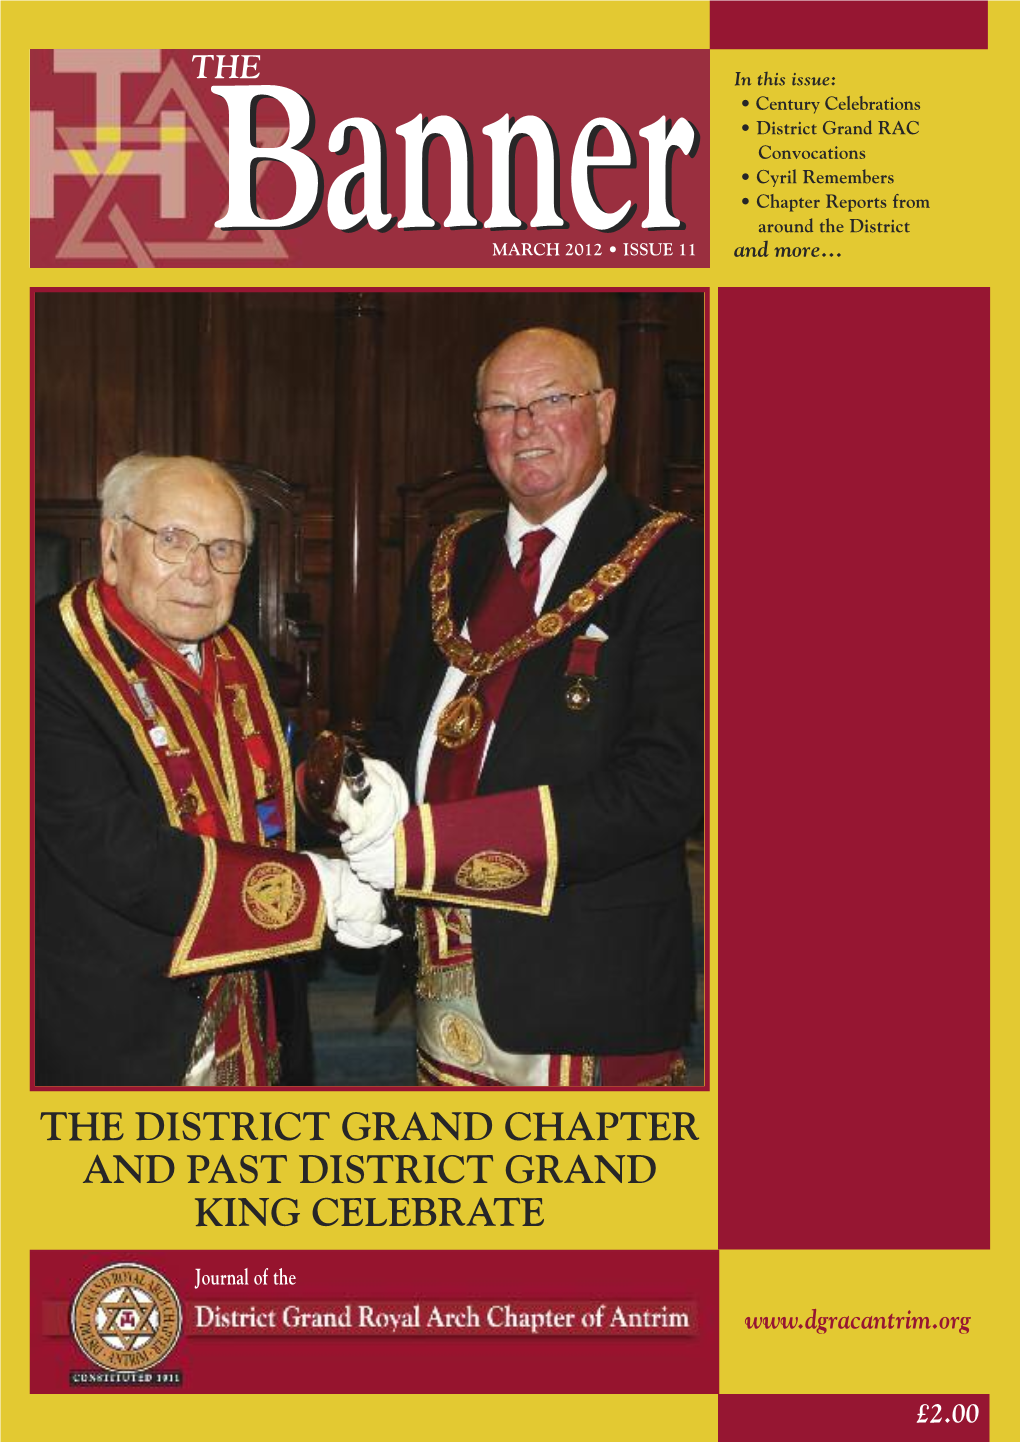 The District Grand Chapter and Past District Grand King Celebrate